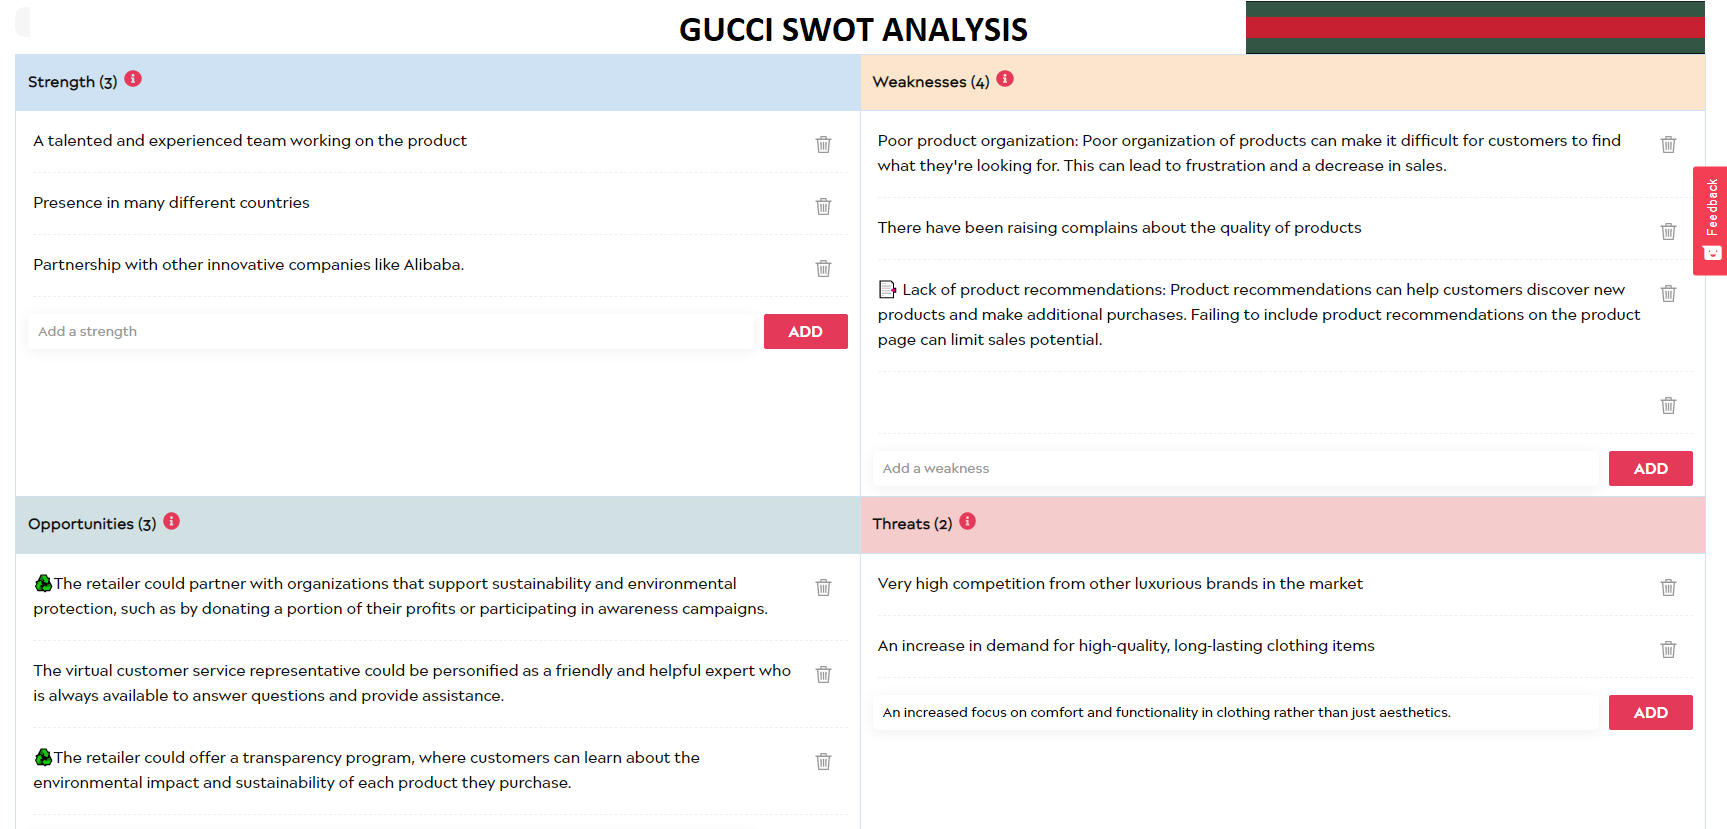 Gucci Swot analysis made with Epiprodux tool